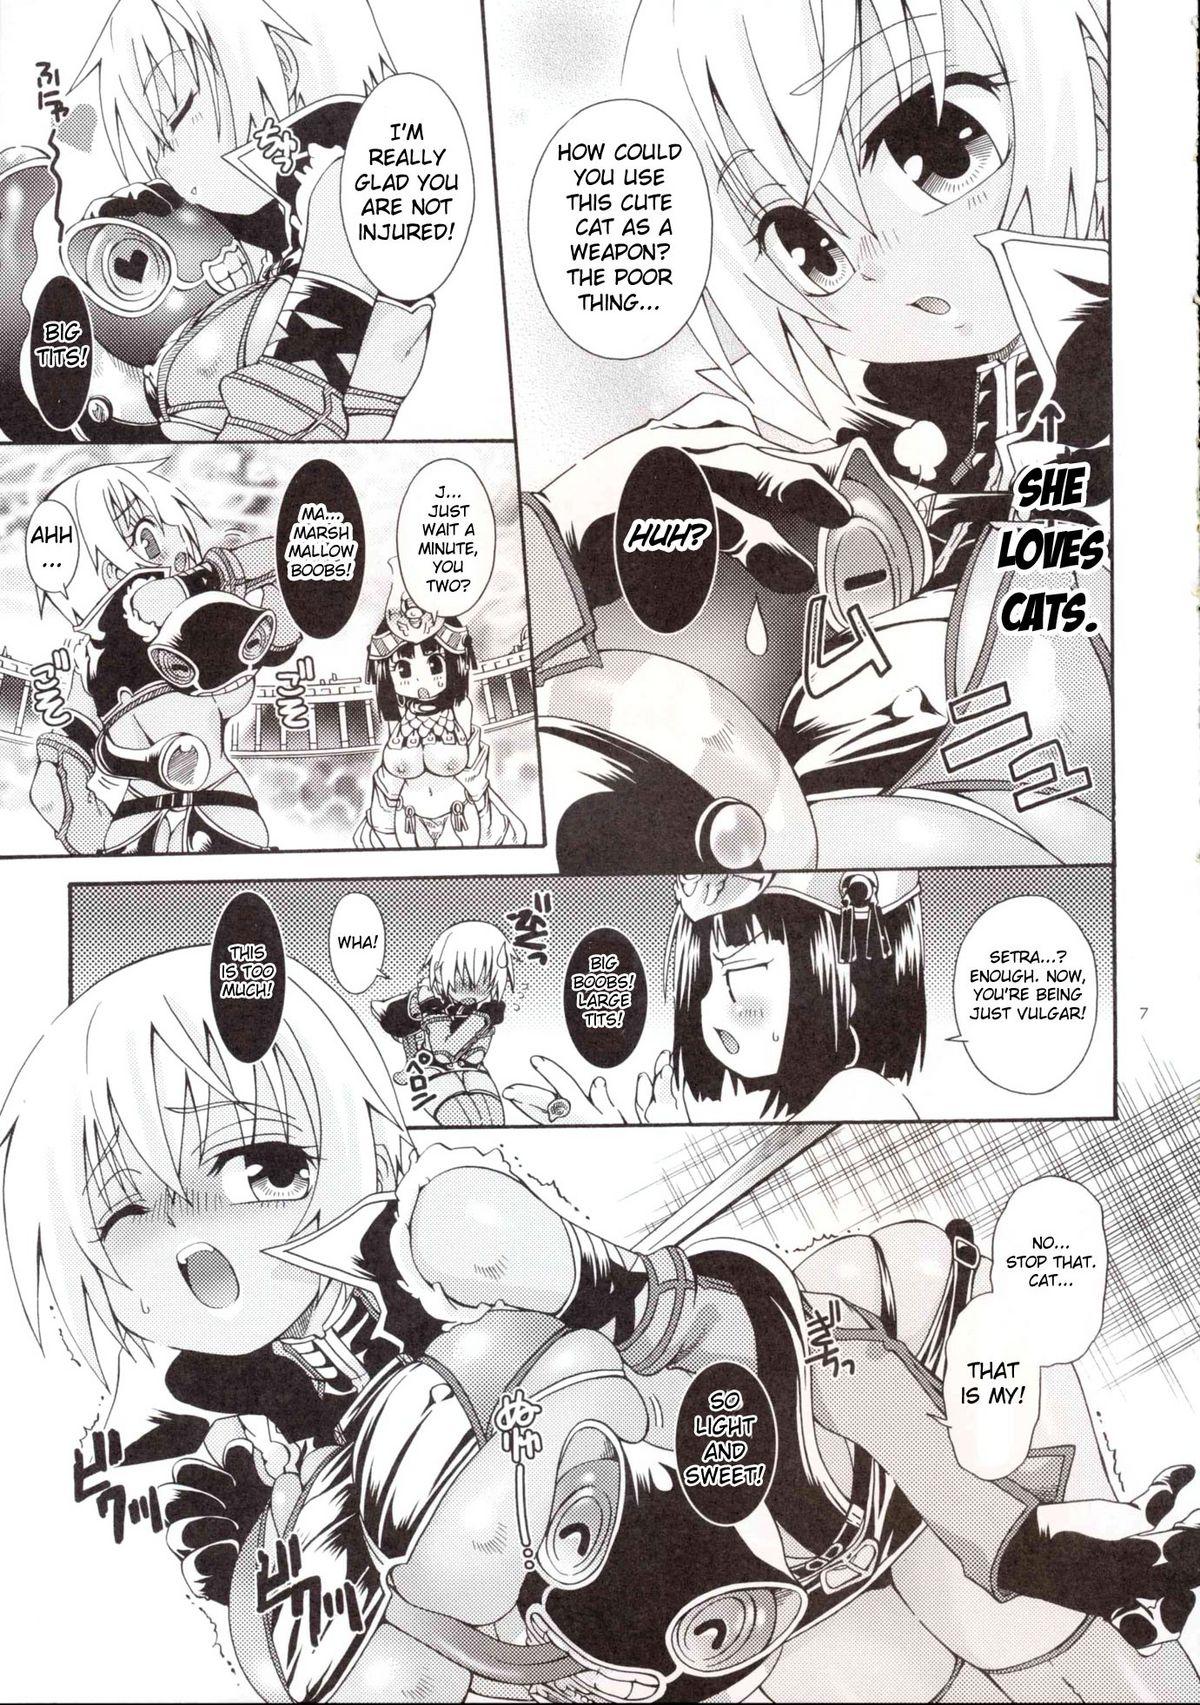 Sex Tape Cat Fight Over Drive - Queens blade Students - Page 6